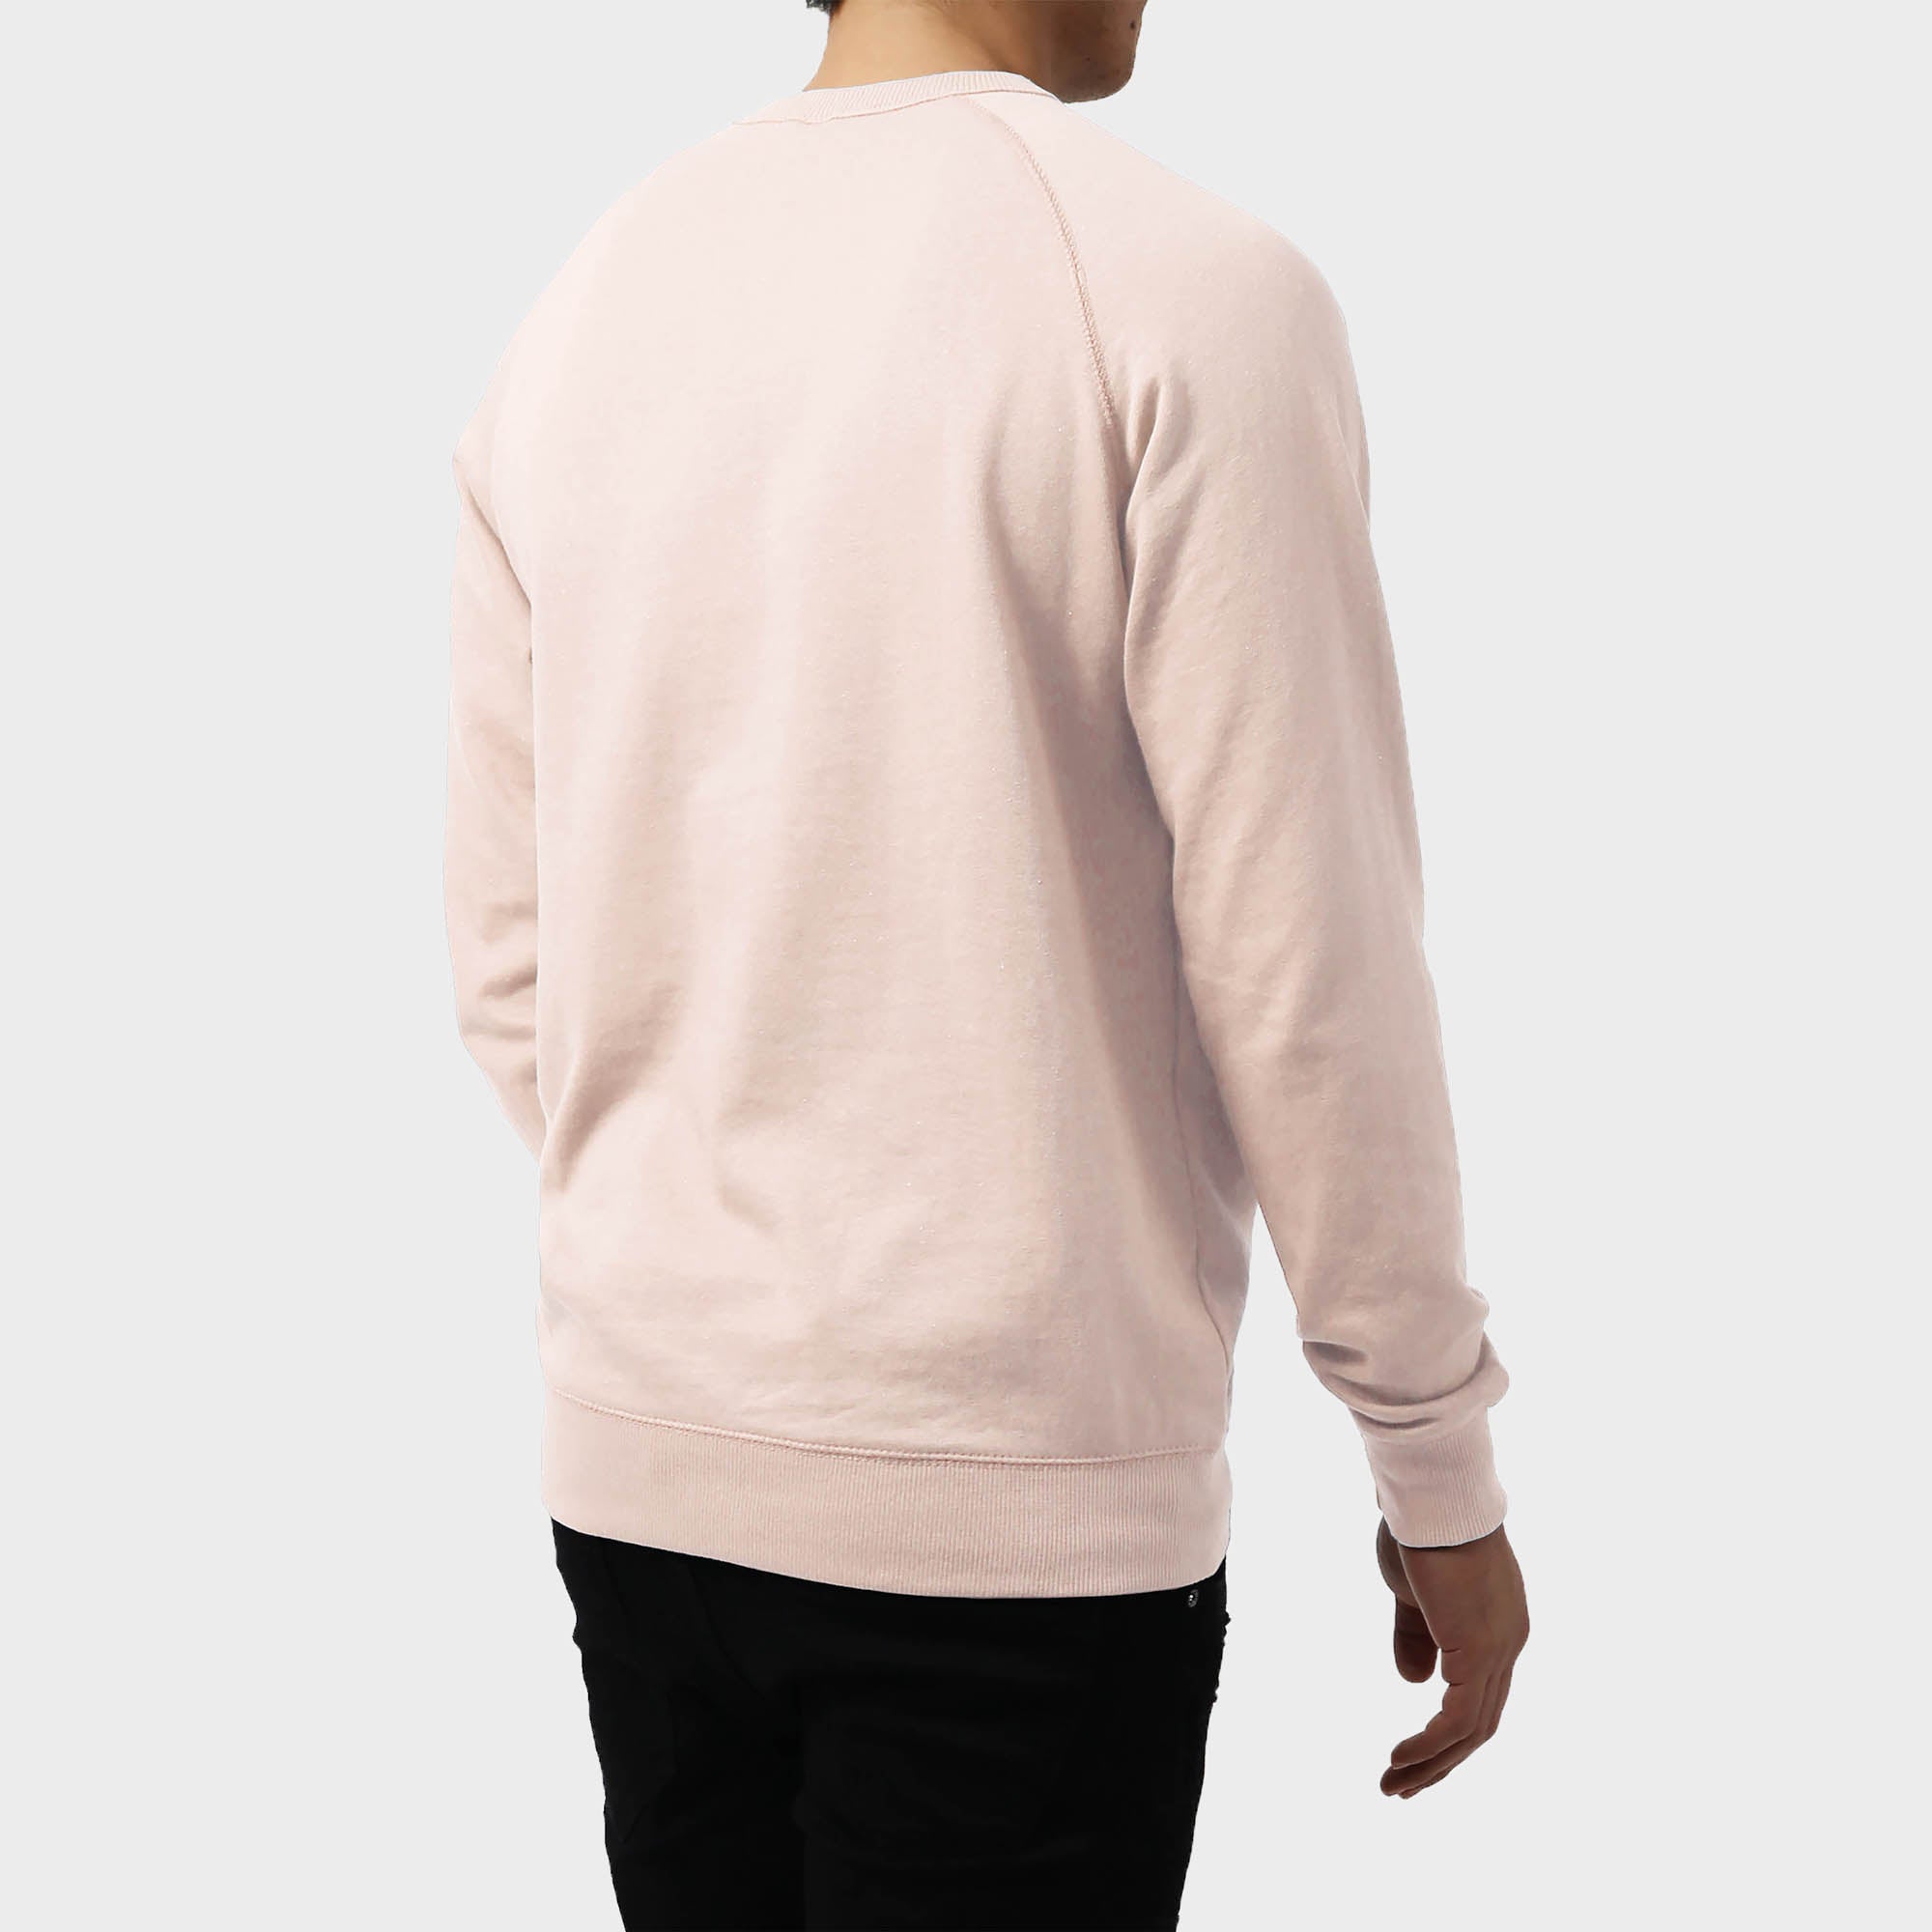 sweater_cardigan_crew neck sweater_long sweater_mens sweater_cute sweaters_mens cardigan_french terry fabric_french terry_Nude Pink